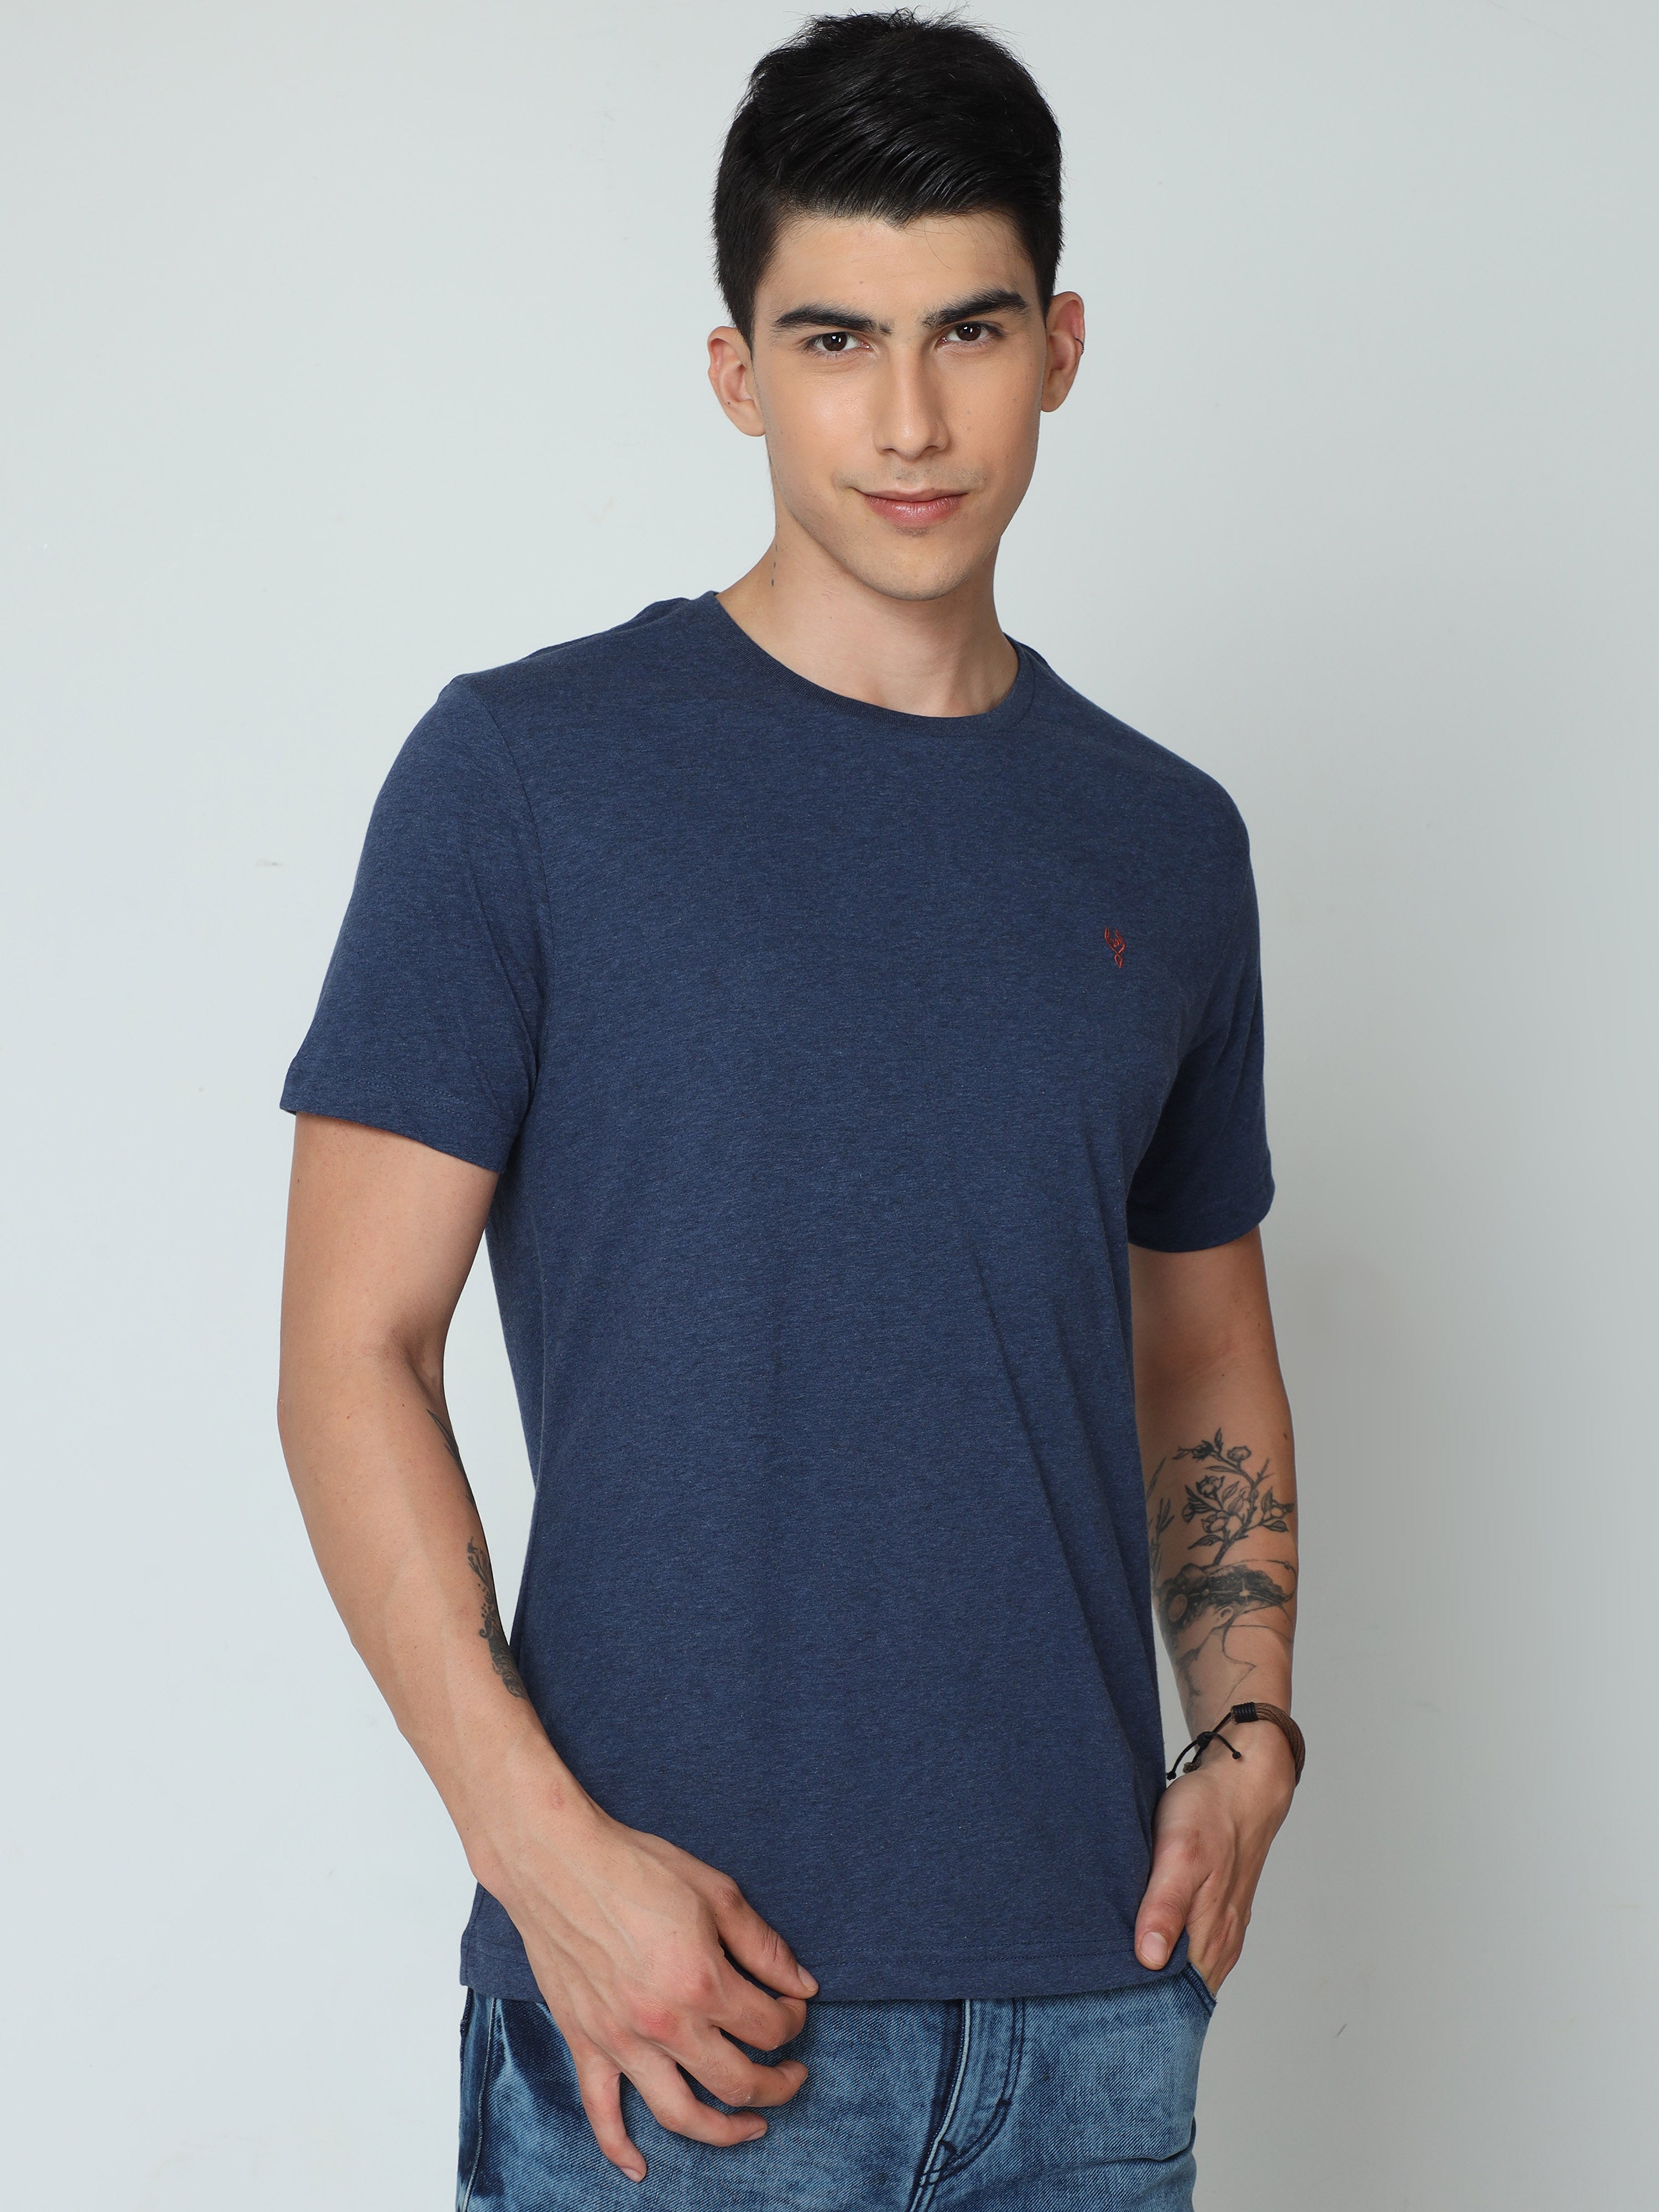 Classic Polo Mens 100% Cotton Navy Solid Crew Neck Half Sleeves Slim Fit T-Shirt |Cp-Rn-19